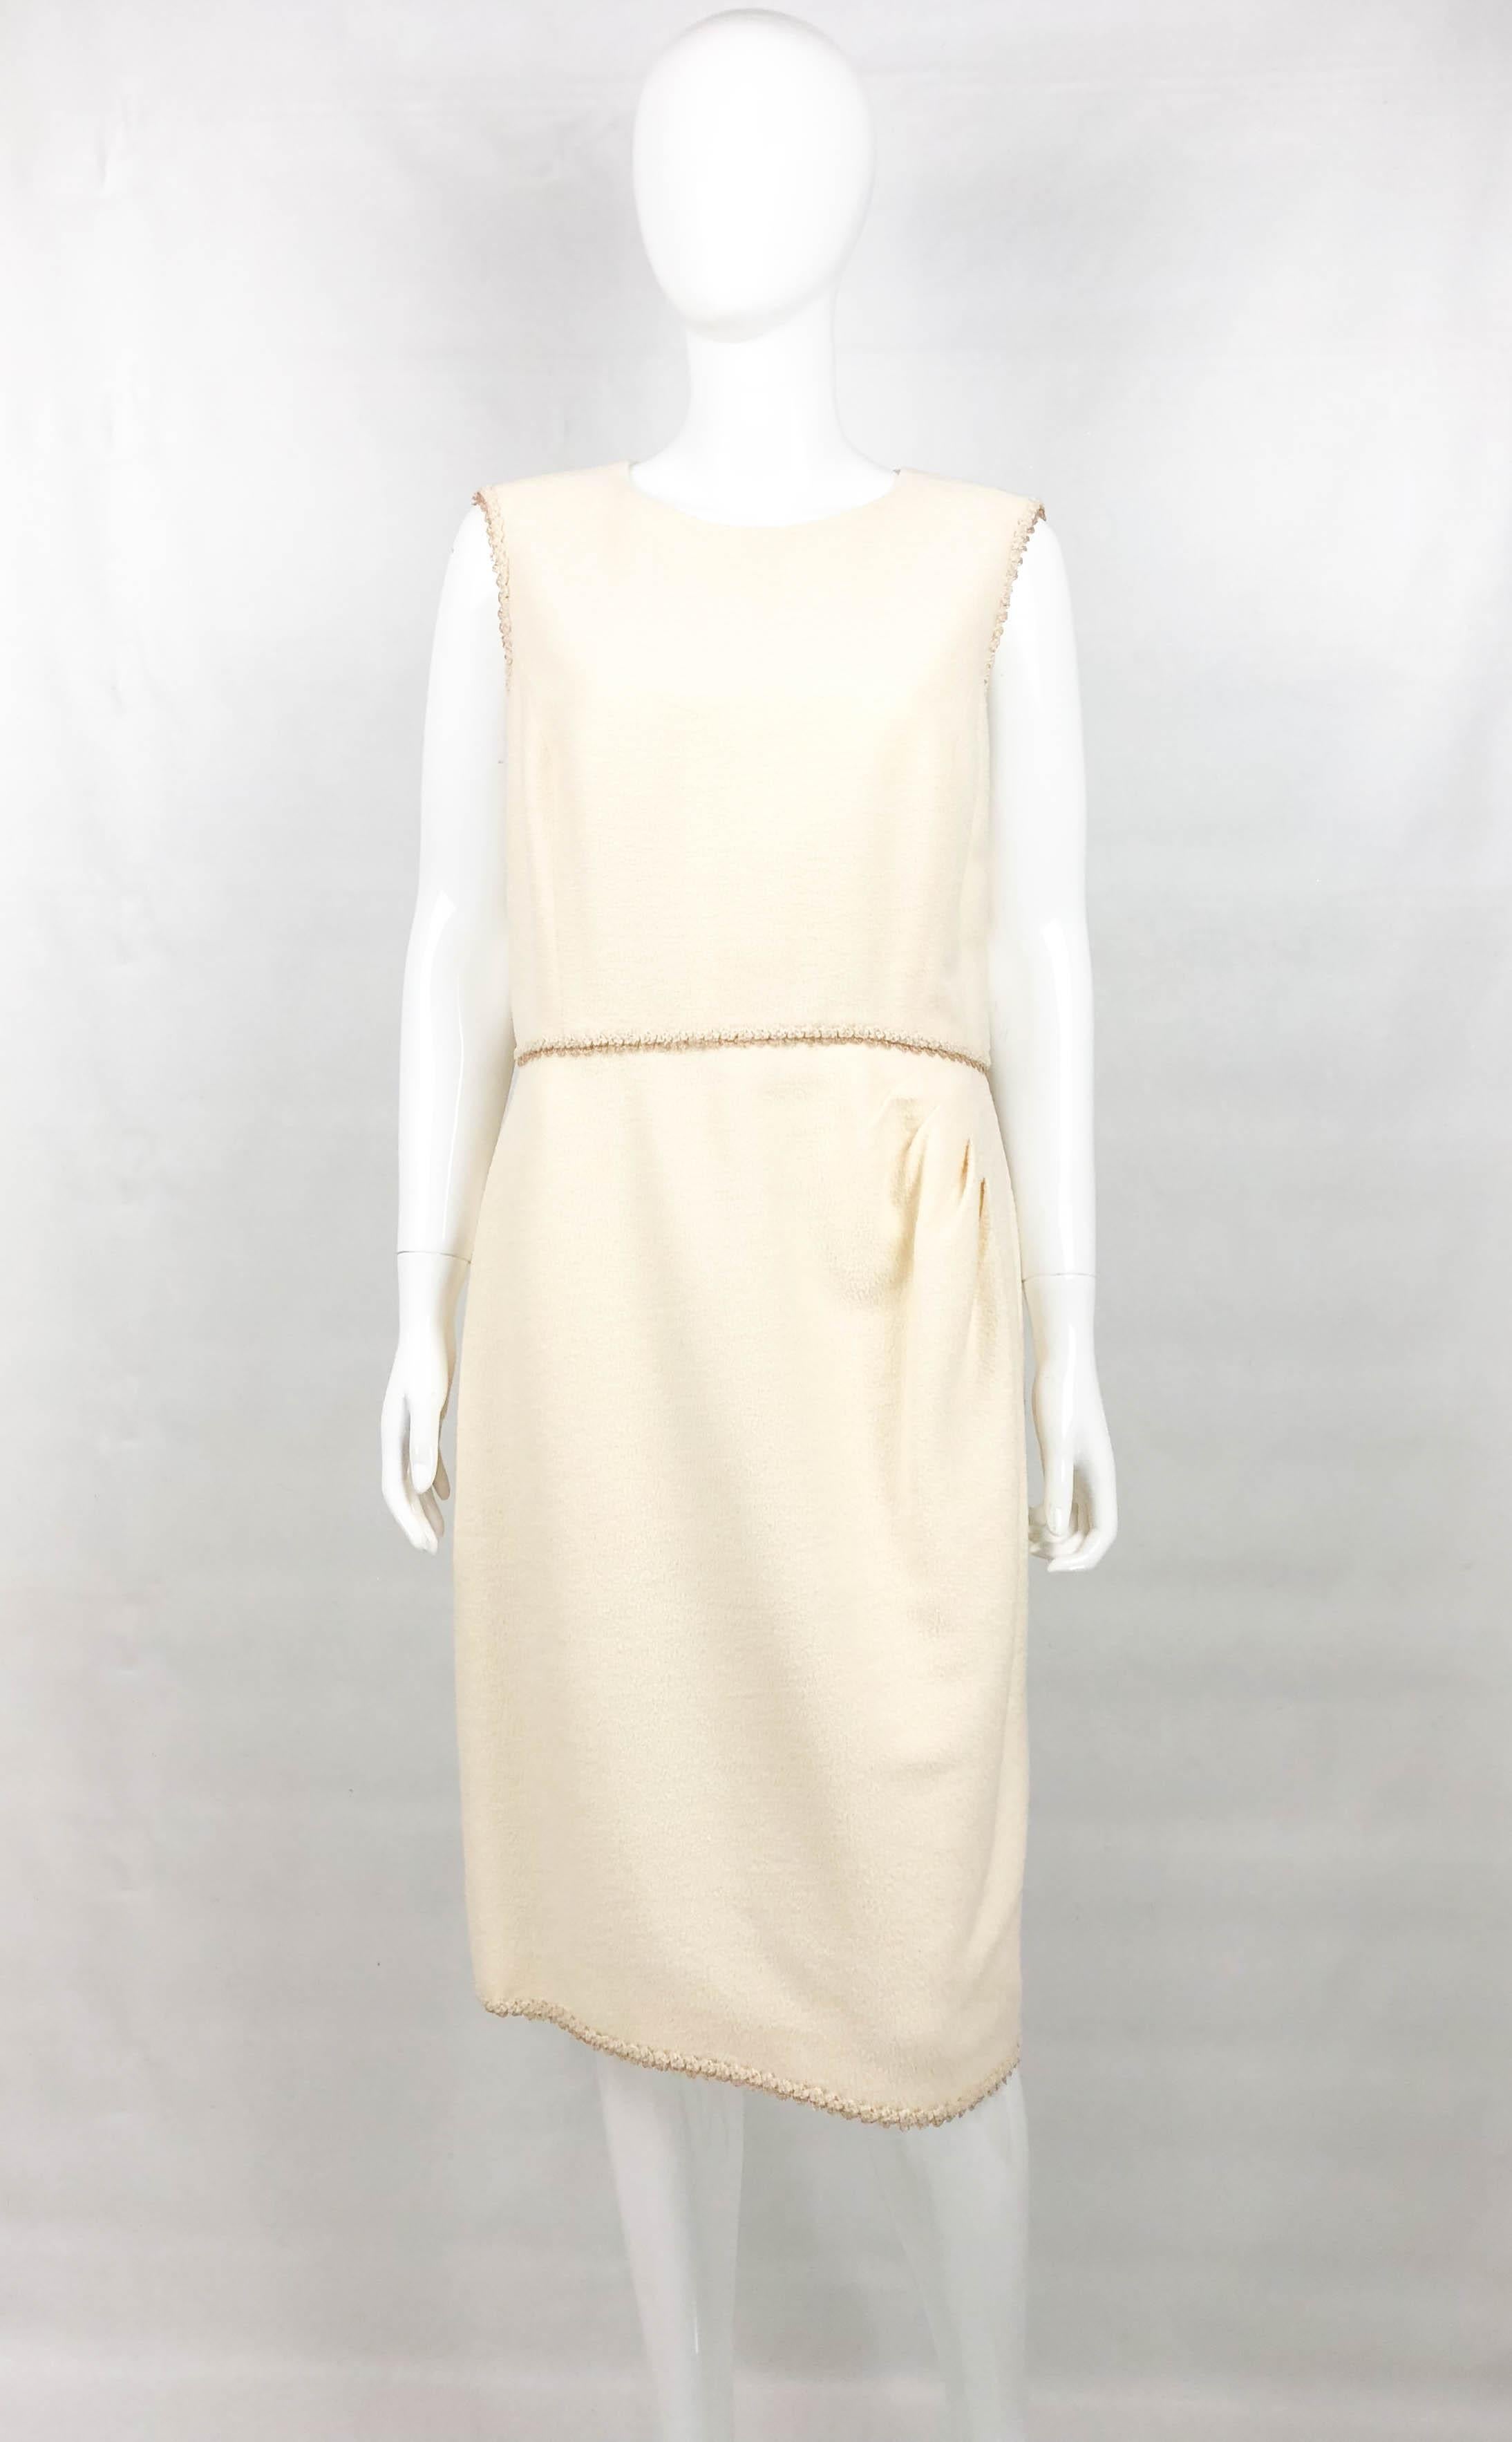 2010 Unworn Chanel Runway Look Cream Dress With Gold Thread Trim In New Condition For Sale In London, Chelsea